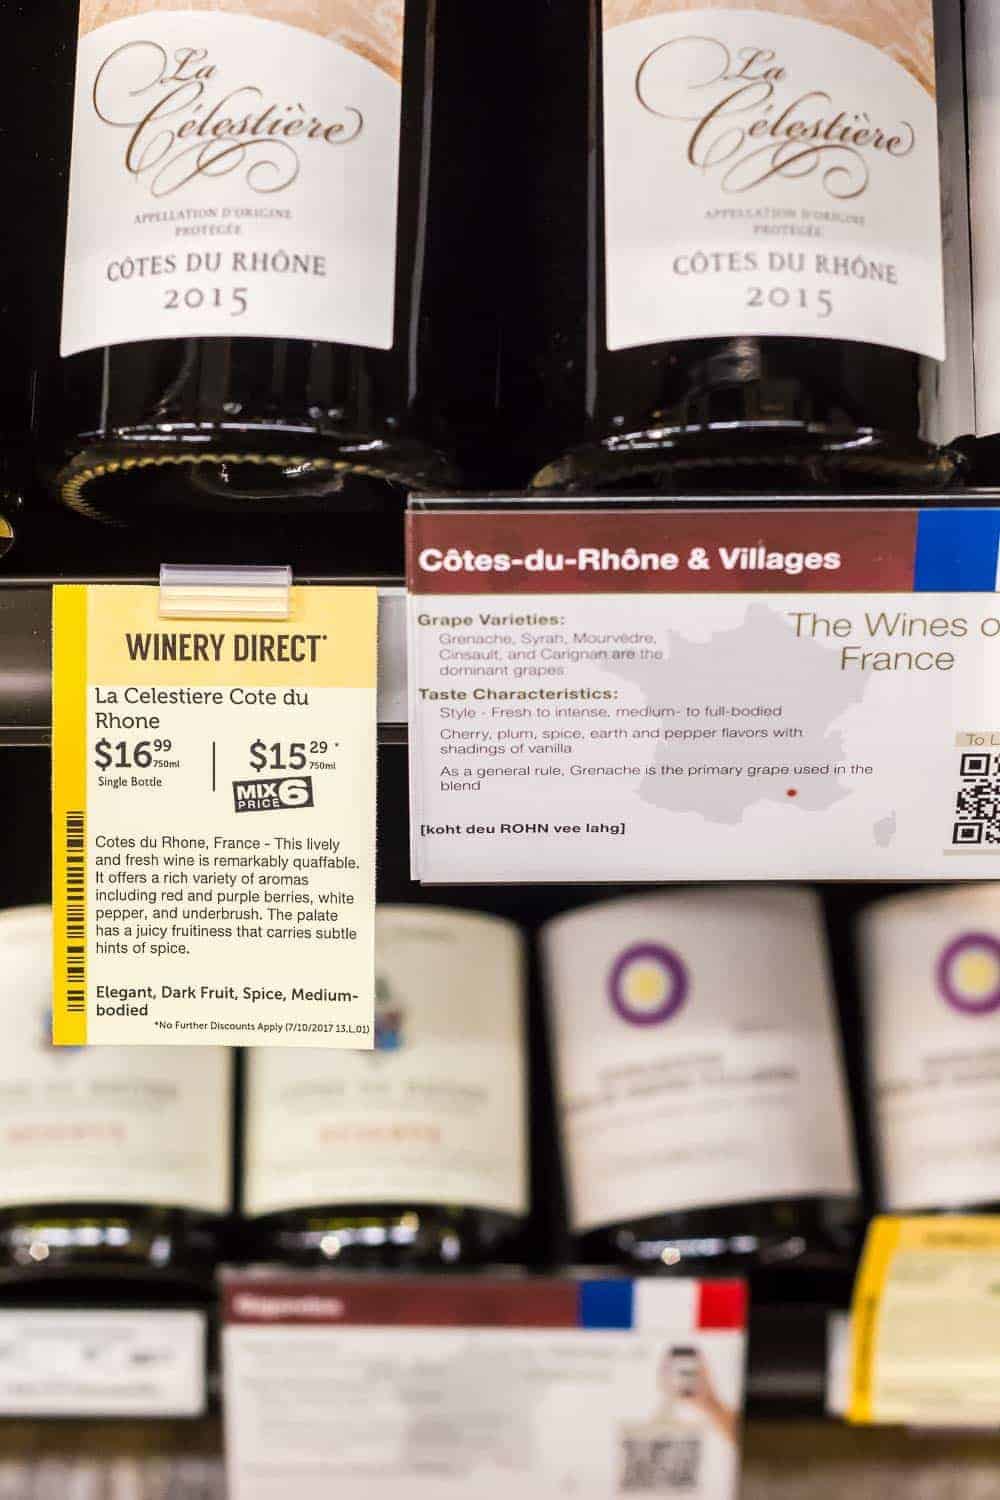 Total Wine & More gives you all the information you need to make smart decisions about wine buying.